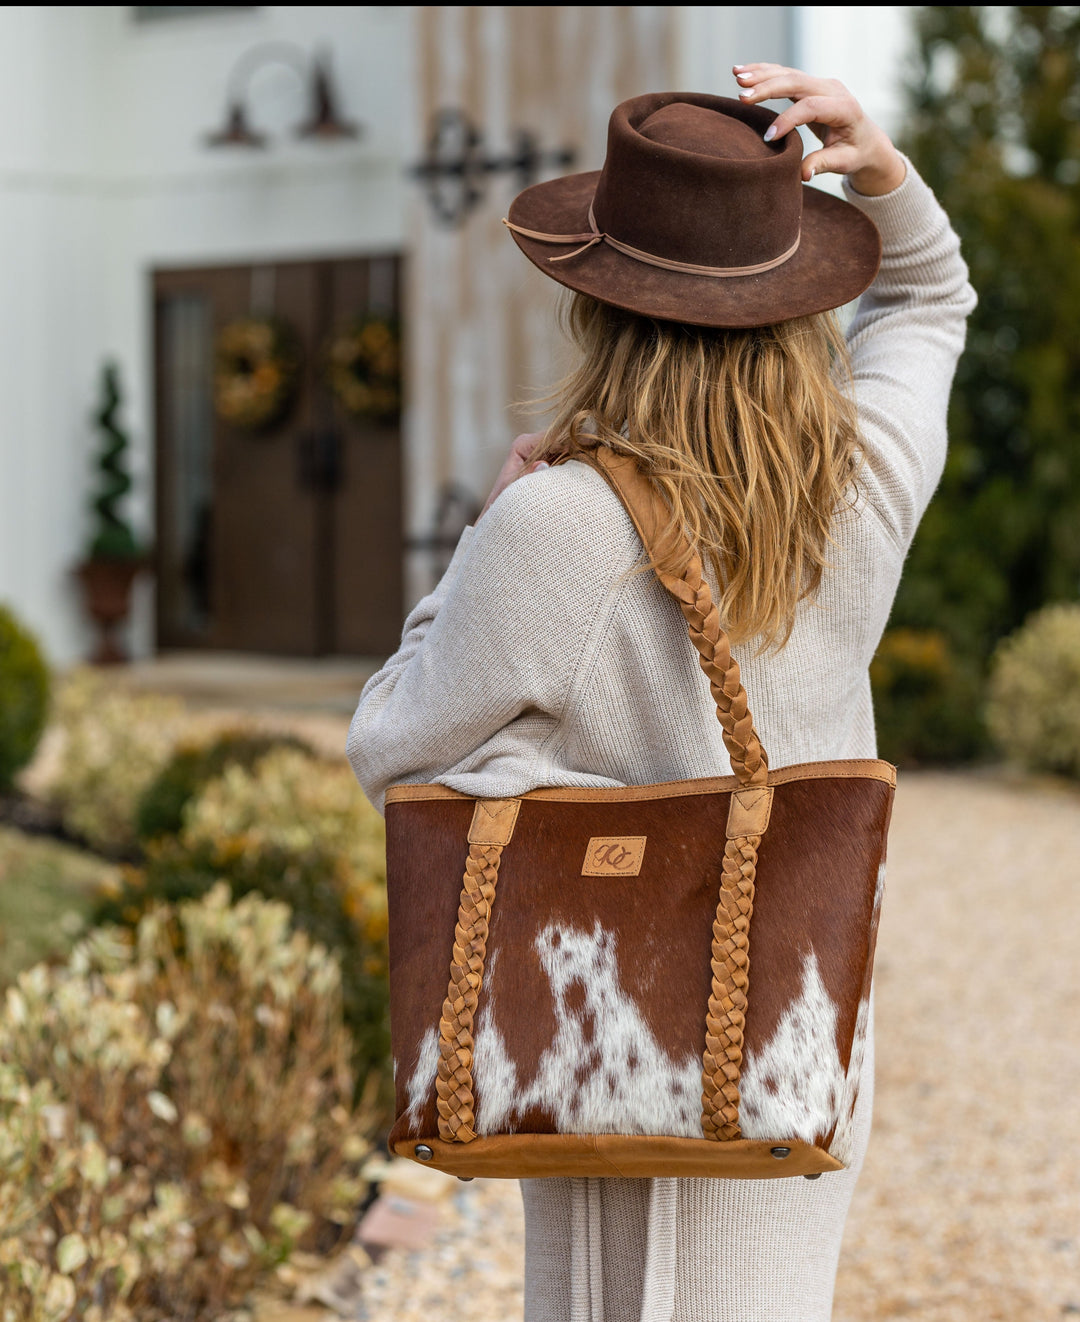 Riley | Leather Concealed Carry Tote, Shoulder Bag | Hair-On Cowhide with Braided Accents | Large-Size Bag | Locking Interior Concealment